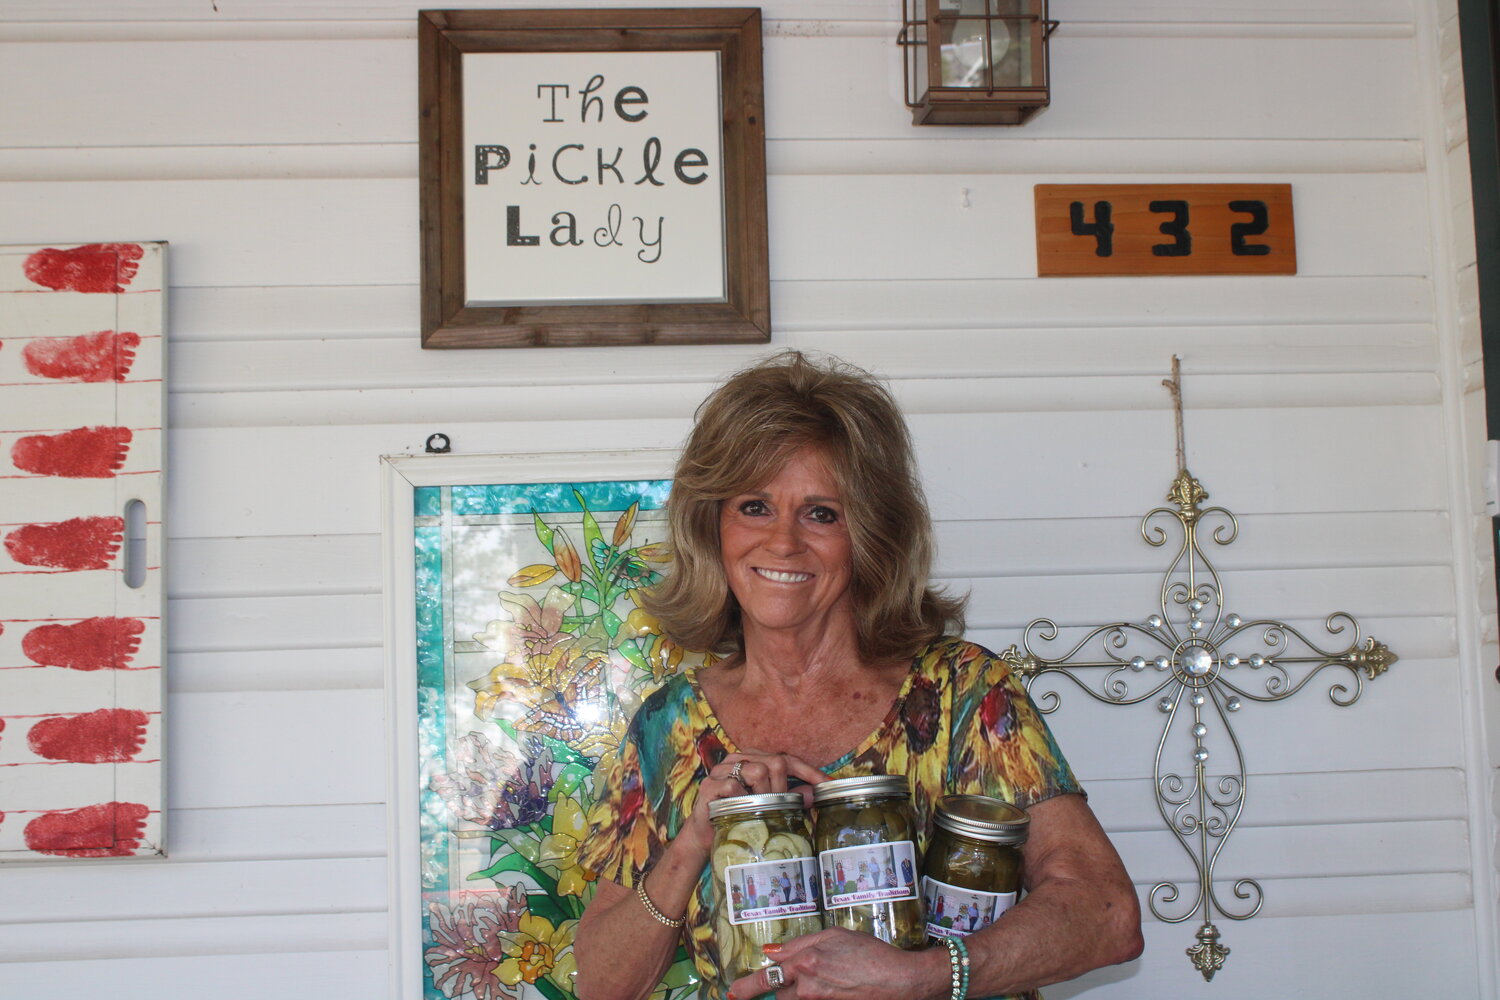 Granbury resident Cindy Dennis now has a new pickle customer — Ronnie Dunn, of the American country music duo Brooks & Dunn. For more than a decade, Dennis has been selling her homemade pickles out of her home in Granbury to other residents and friends.